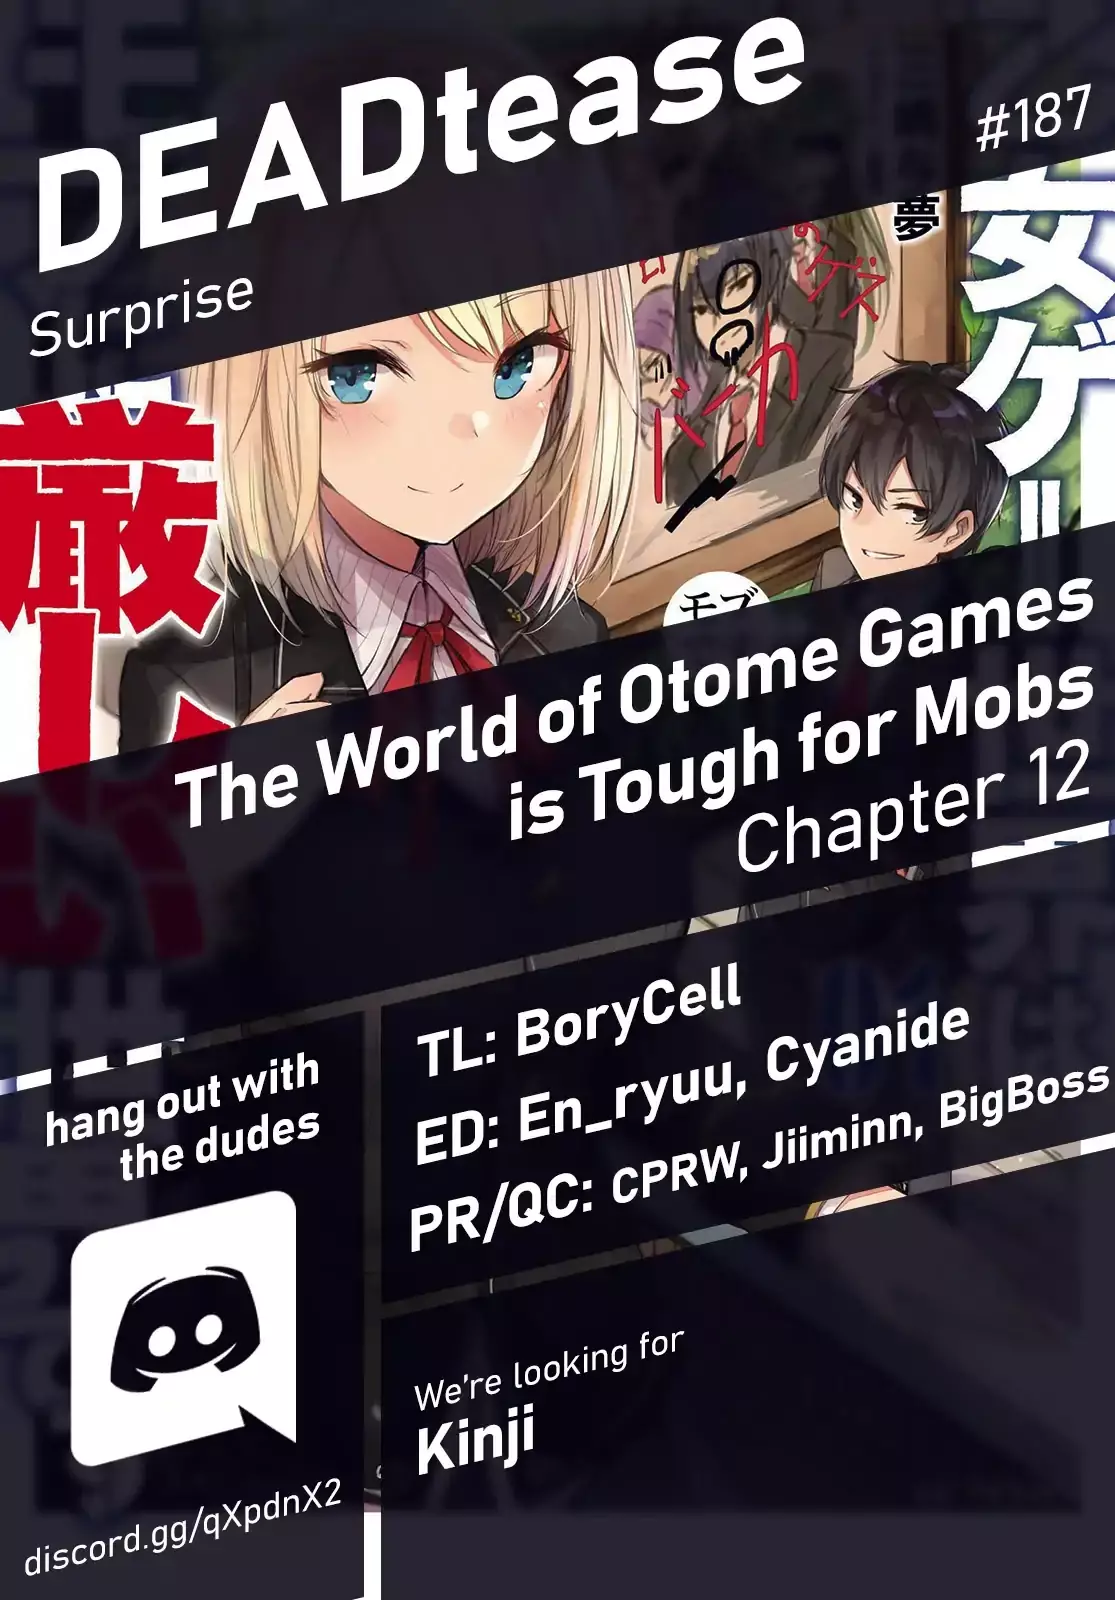 The World Of Otome Games Is Tough For Mobs - 12 page 1